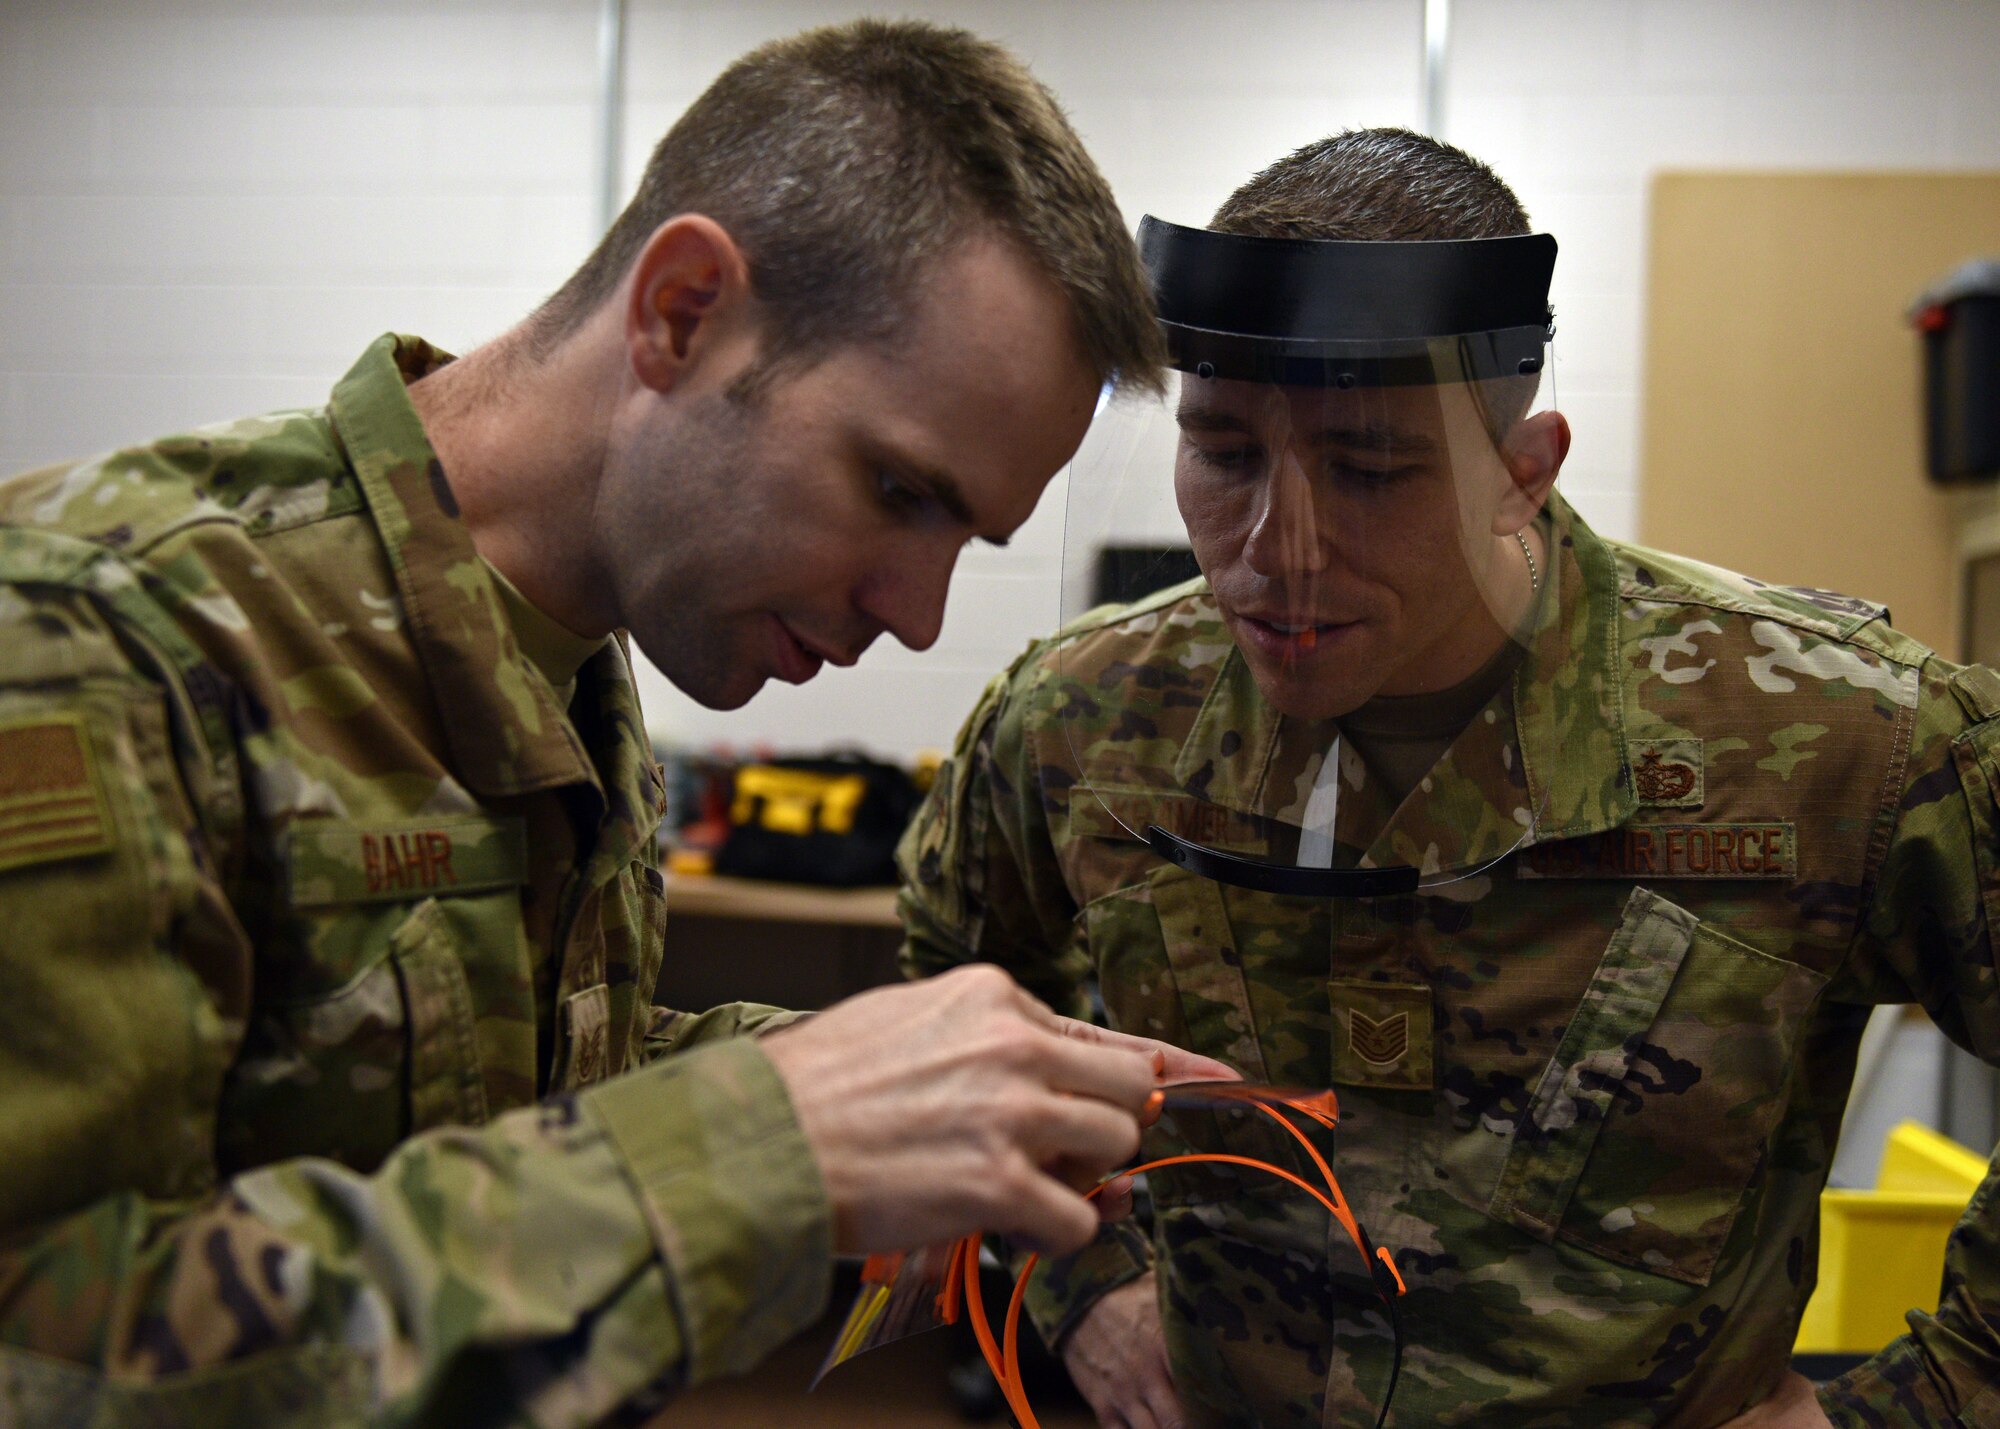 U.S. Air Force Staff Sgt. Jonathan Bahr, 312th Training Squadron Special Instruments Training course instructor, and Tech. Sgt. Donald Kramer, 312th TRS SPINSTRA instructor supervisor, prepare and don  3D printed face shields at the Louis F Garland Department of Defense Fire Academy on Goodfellow Air Force Base, Texas, March 31, 2020. The instructors got the idea after seeing other organizations modeling and printing these supplies to provide for medical facilities. (U.S. Air Force photo by Airman 1st Class Robyn Hunsinger)